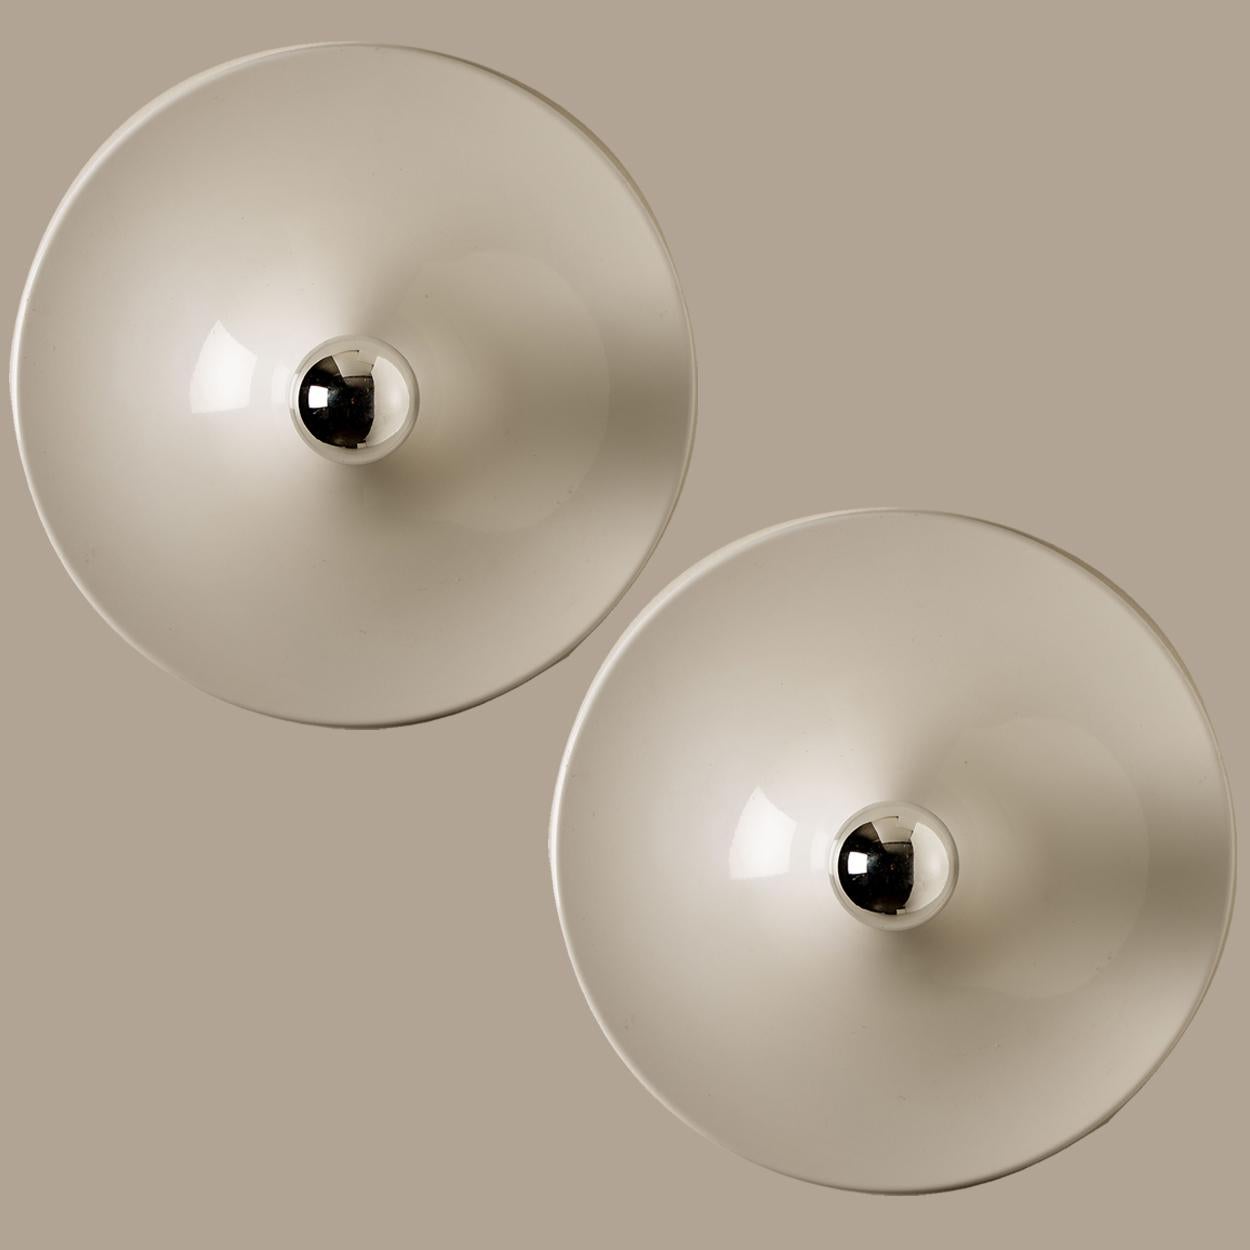 A gorgeous set of two disc wall lights, designed by Gianluigi Gorgoni. Manufactured by the Italian lighting company, Stilnovo in 1970's. The lights are made of a white coated metal. They can be used as wall lights but also look great as a ceiling